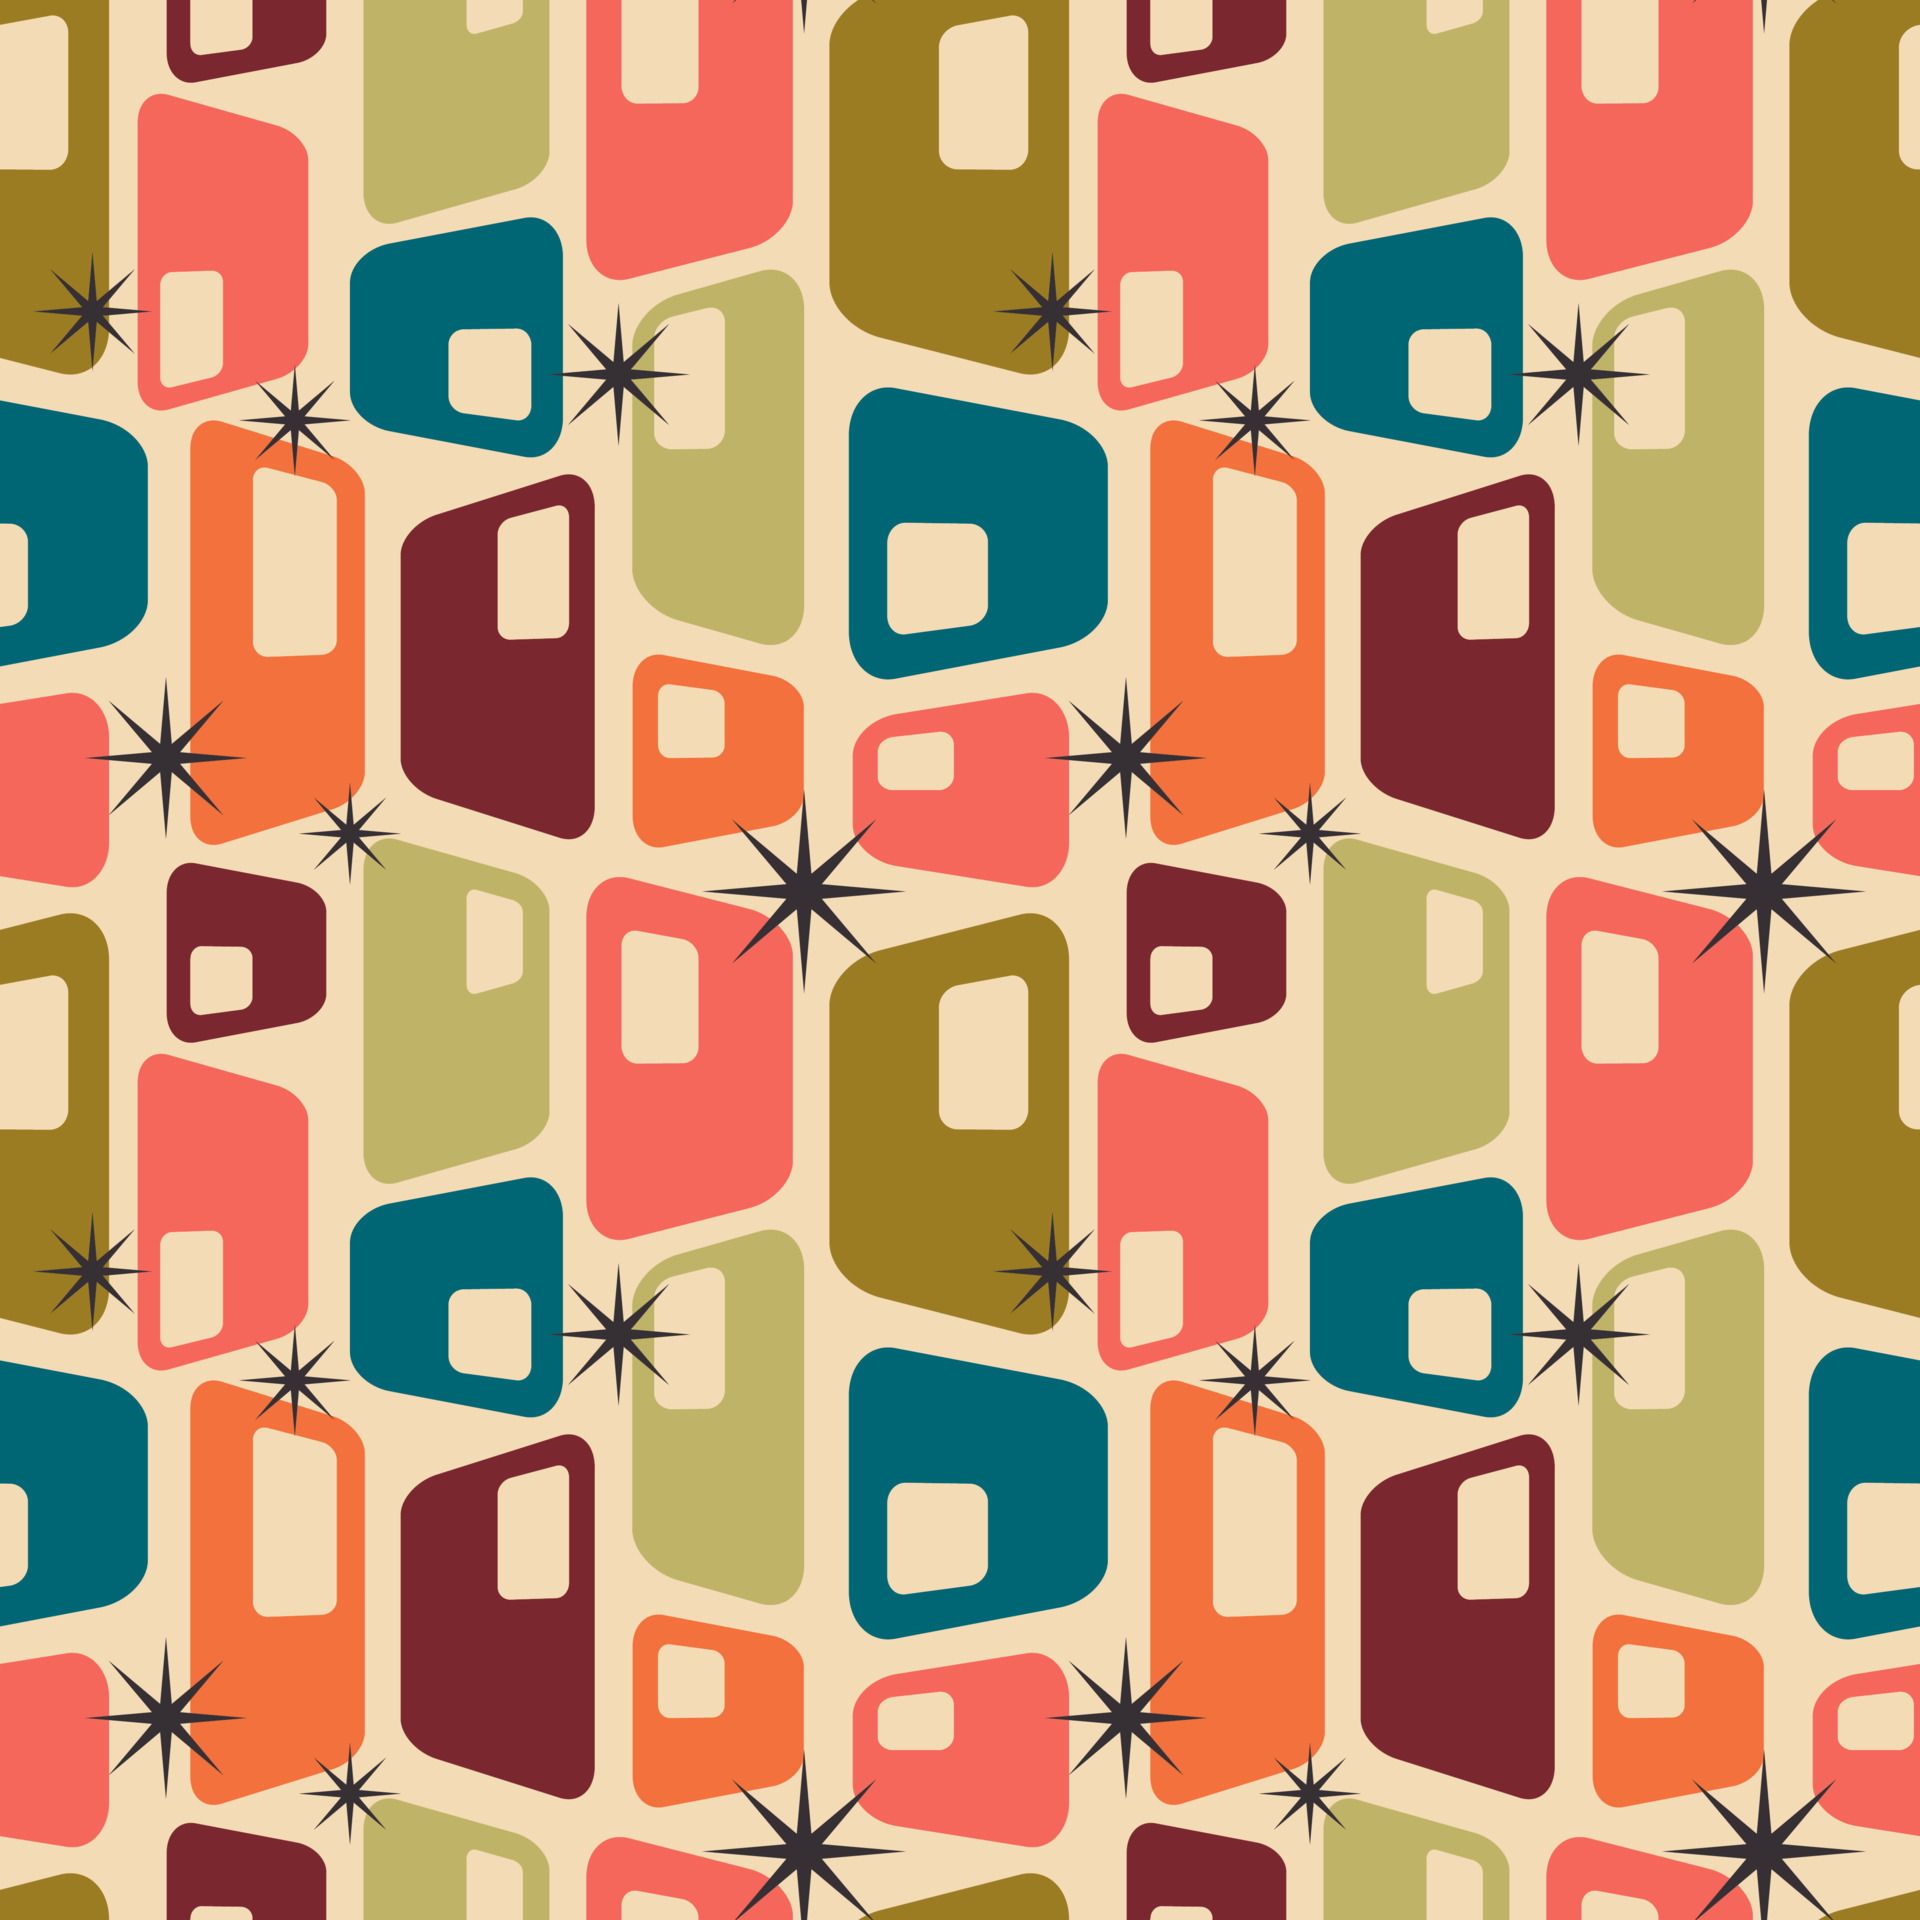 A repeating pattern of rectangles and stars - 70s, vintage fall